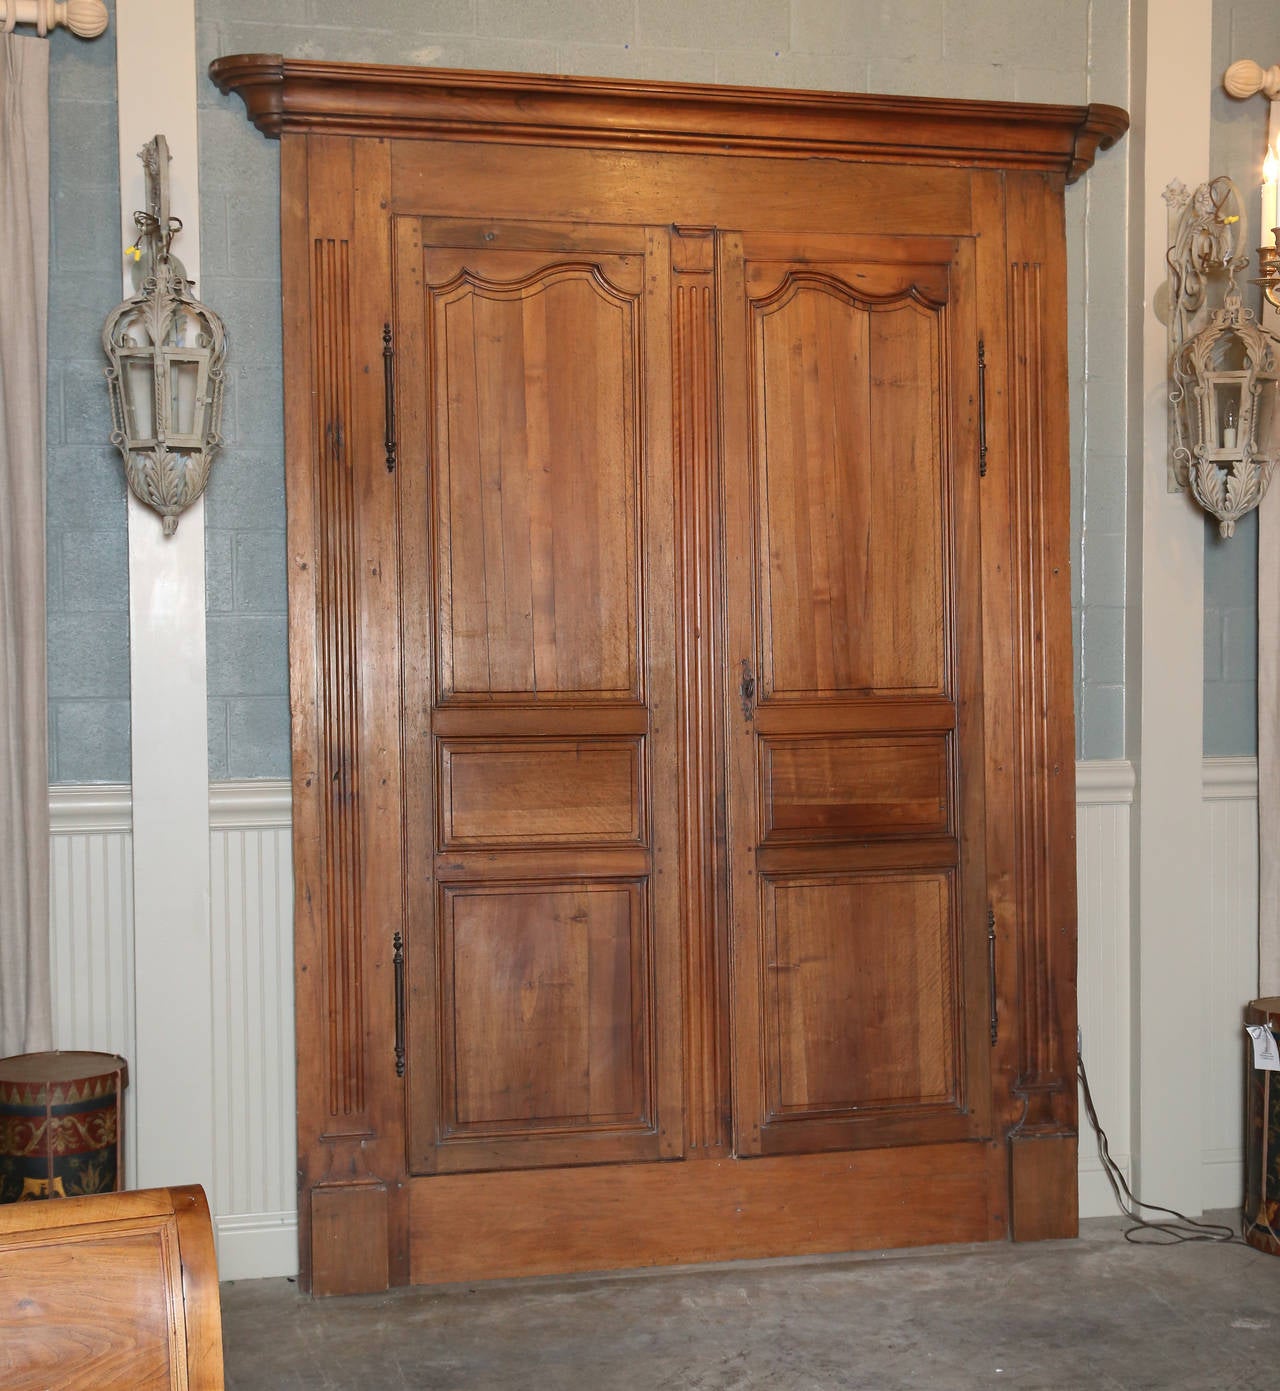 Antique Walnut French Armoire Doors with Original Frame, Crown and Hardware For Sale 1